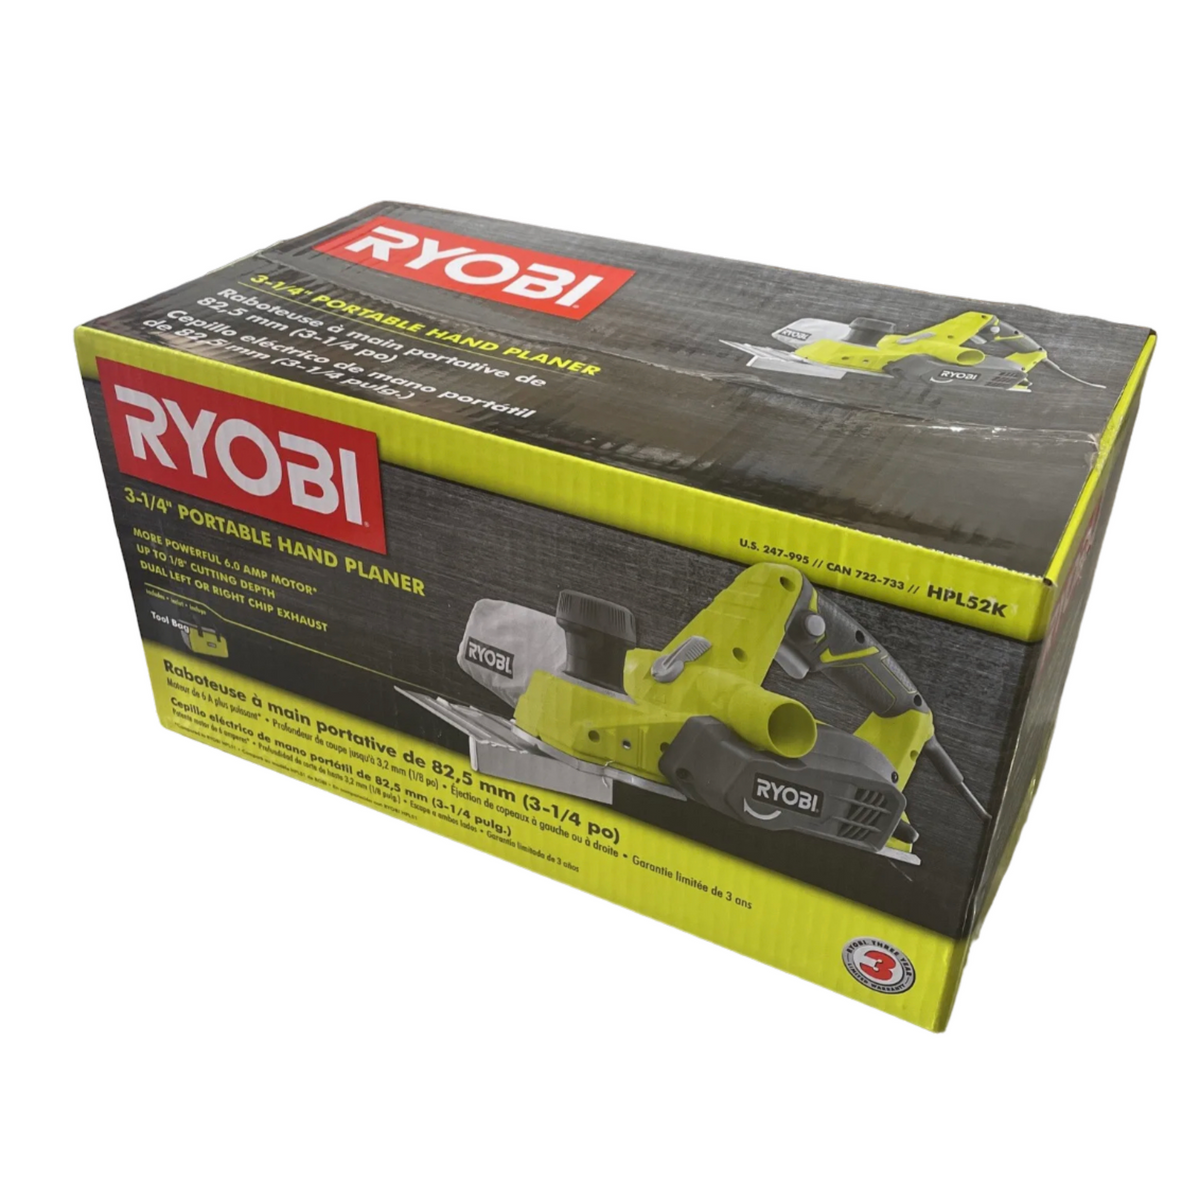 RYOBI Amp Corded 3-1/4 in. Hand Planer with Dust Bag – Ryobi Deal Finders